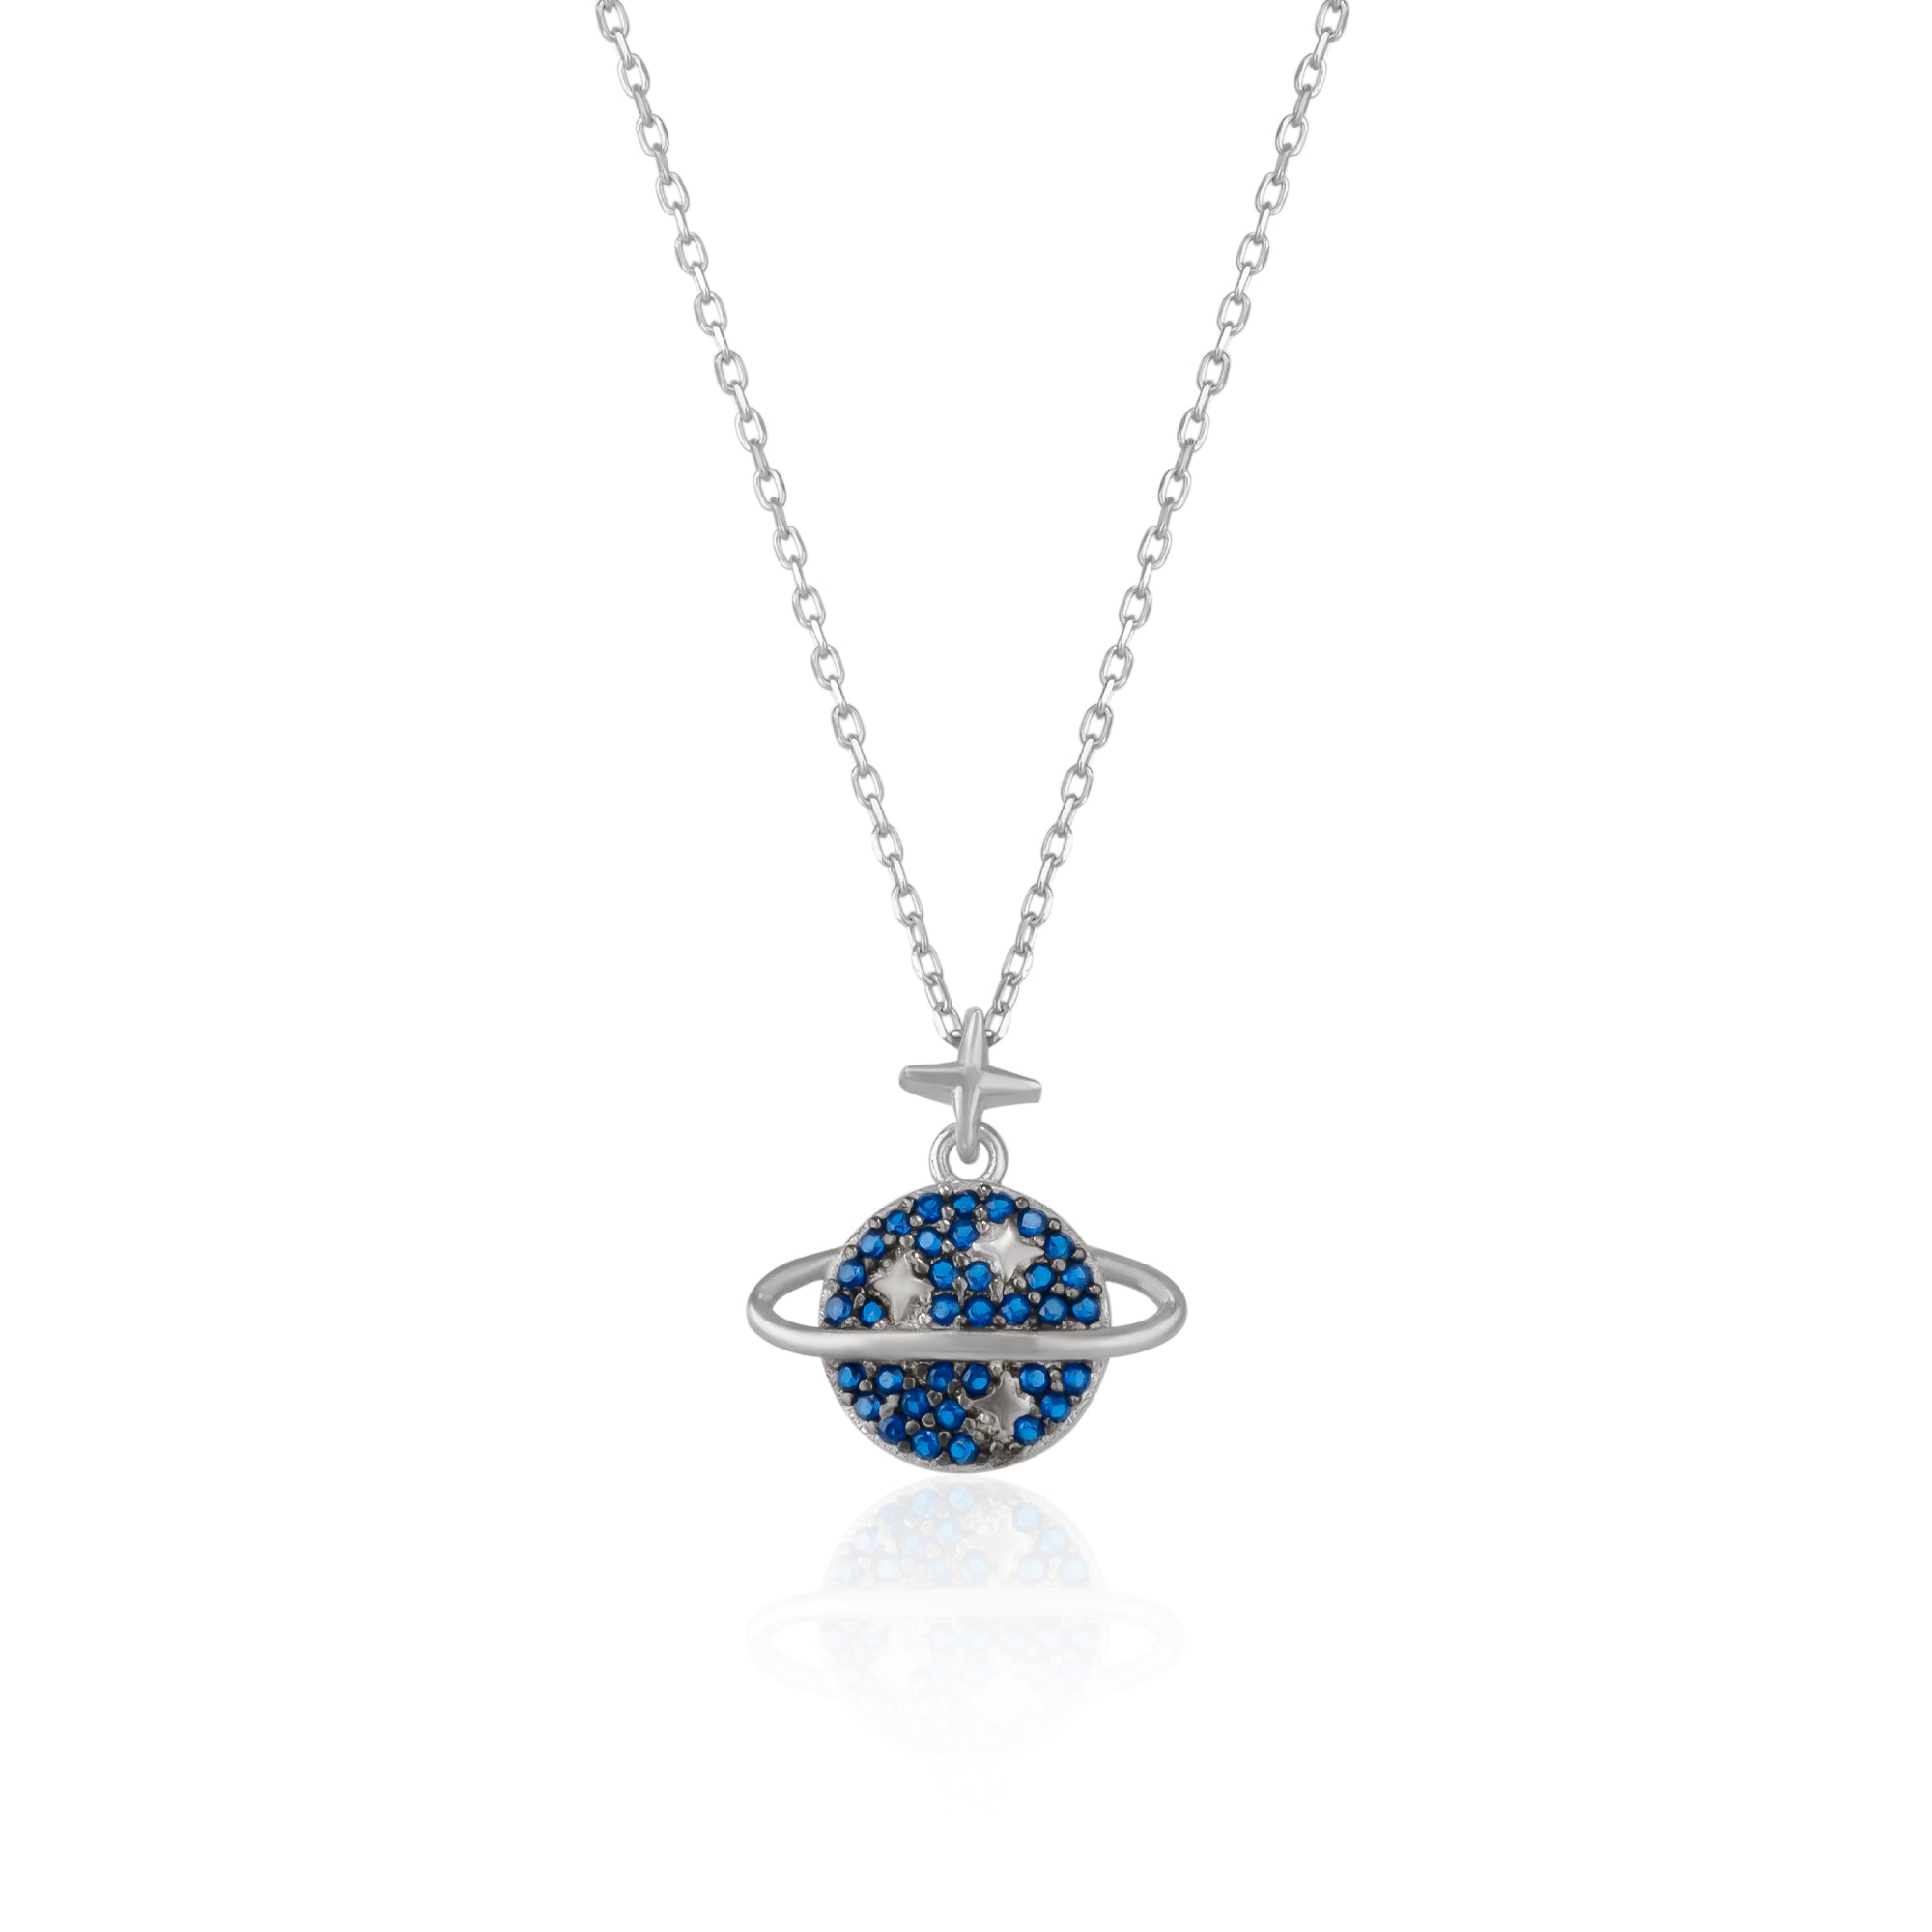 Blue Jewelled Saturn Necklace Sterling Silver